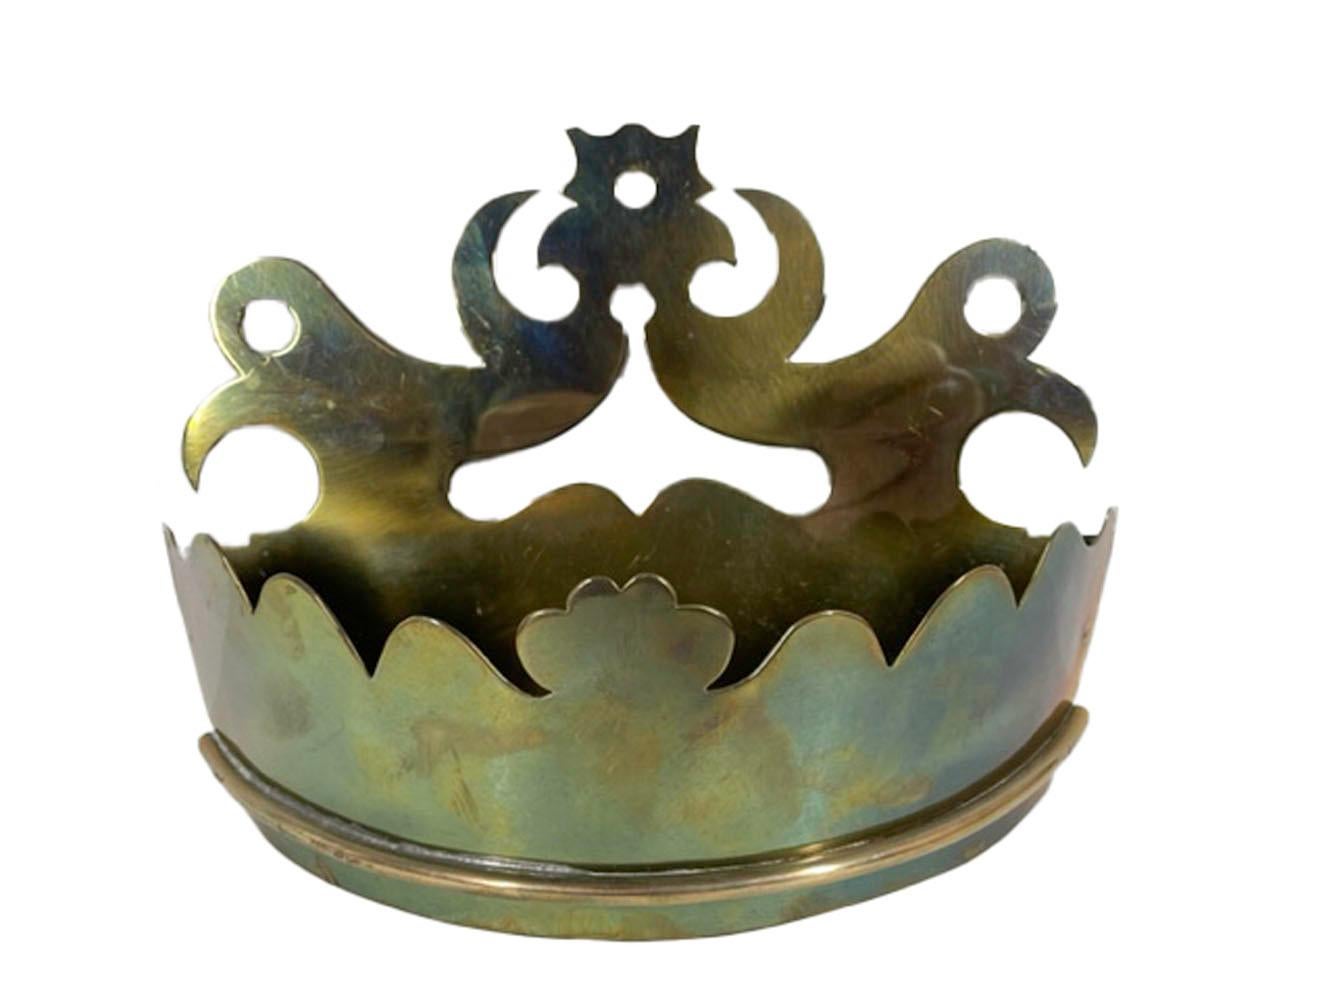 Nineteenth century polished brass wall pocket or tidy of crown form with a bowed front having a shaped top edge and pierced design above an applied red brass beaded molding. These were used by the fireplace or entry door to keep matches, keys, mail,